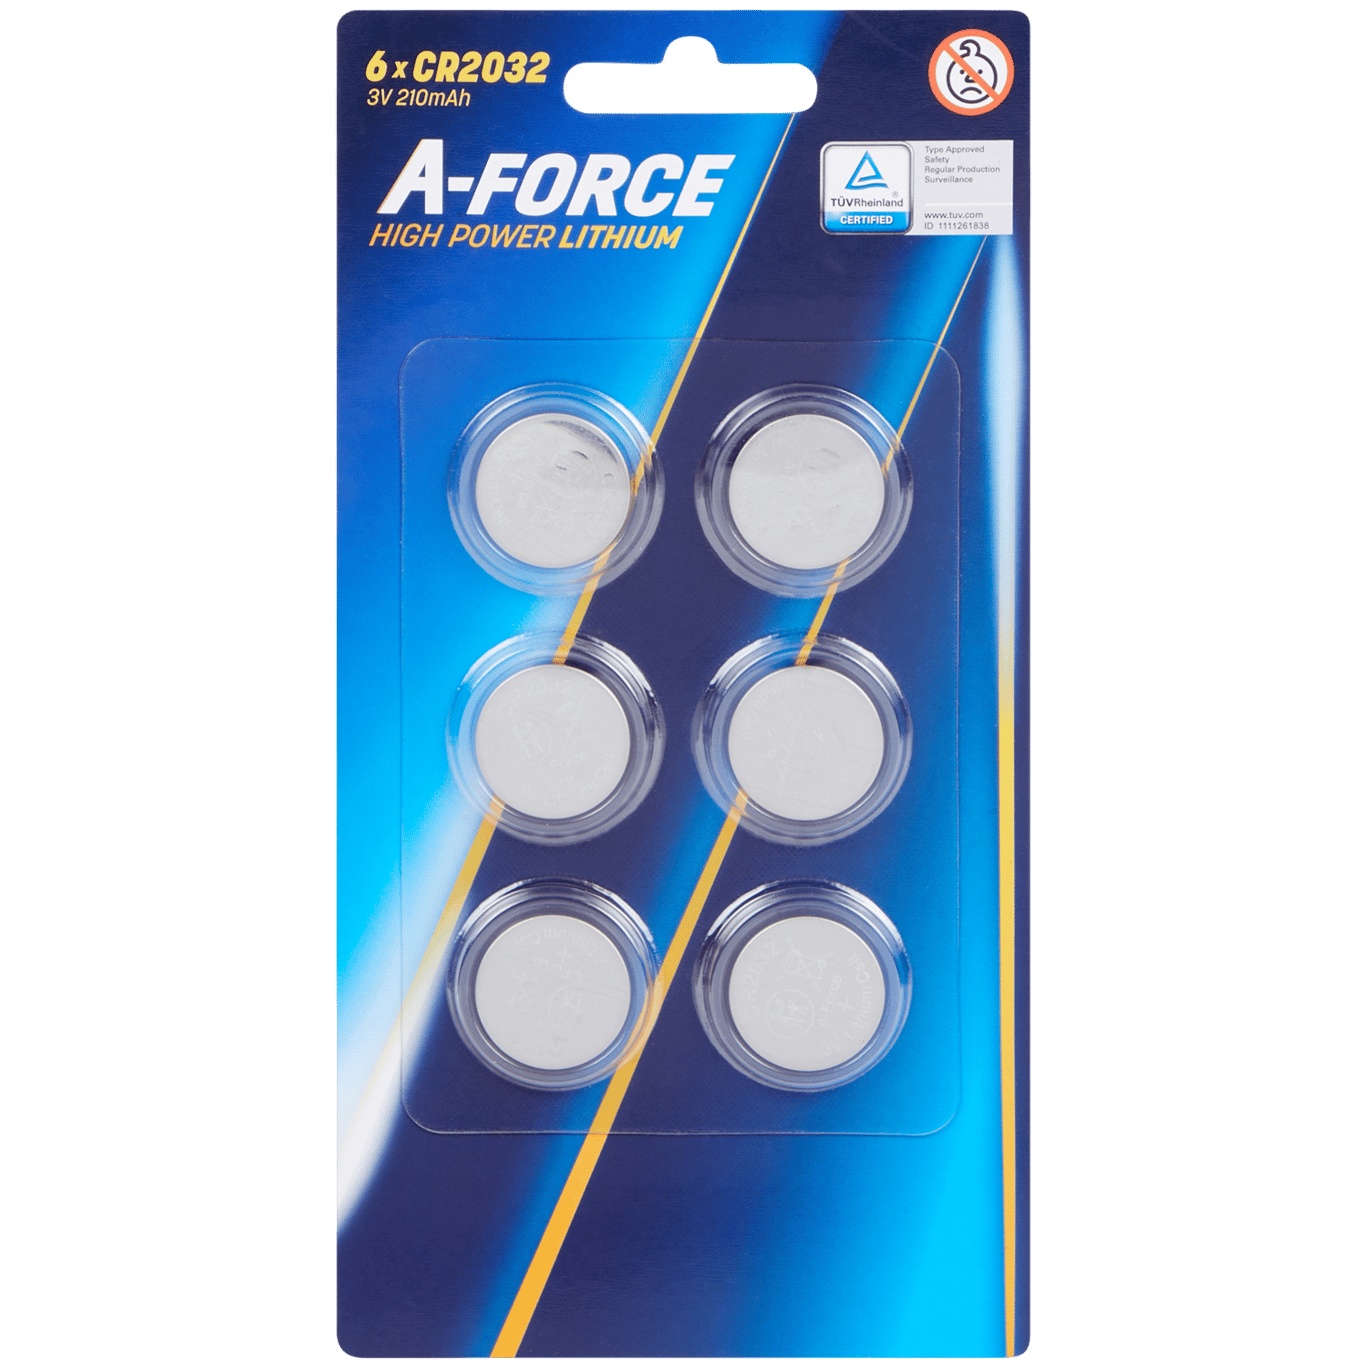 PILES BOUTONS A-FORCE OFFRE DUO CR2032 LITHIUM 3V LR44 AG13 1,5V ALCALINE